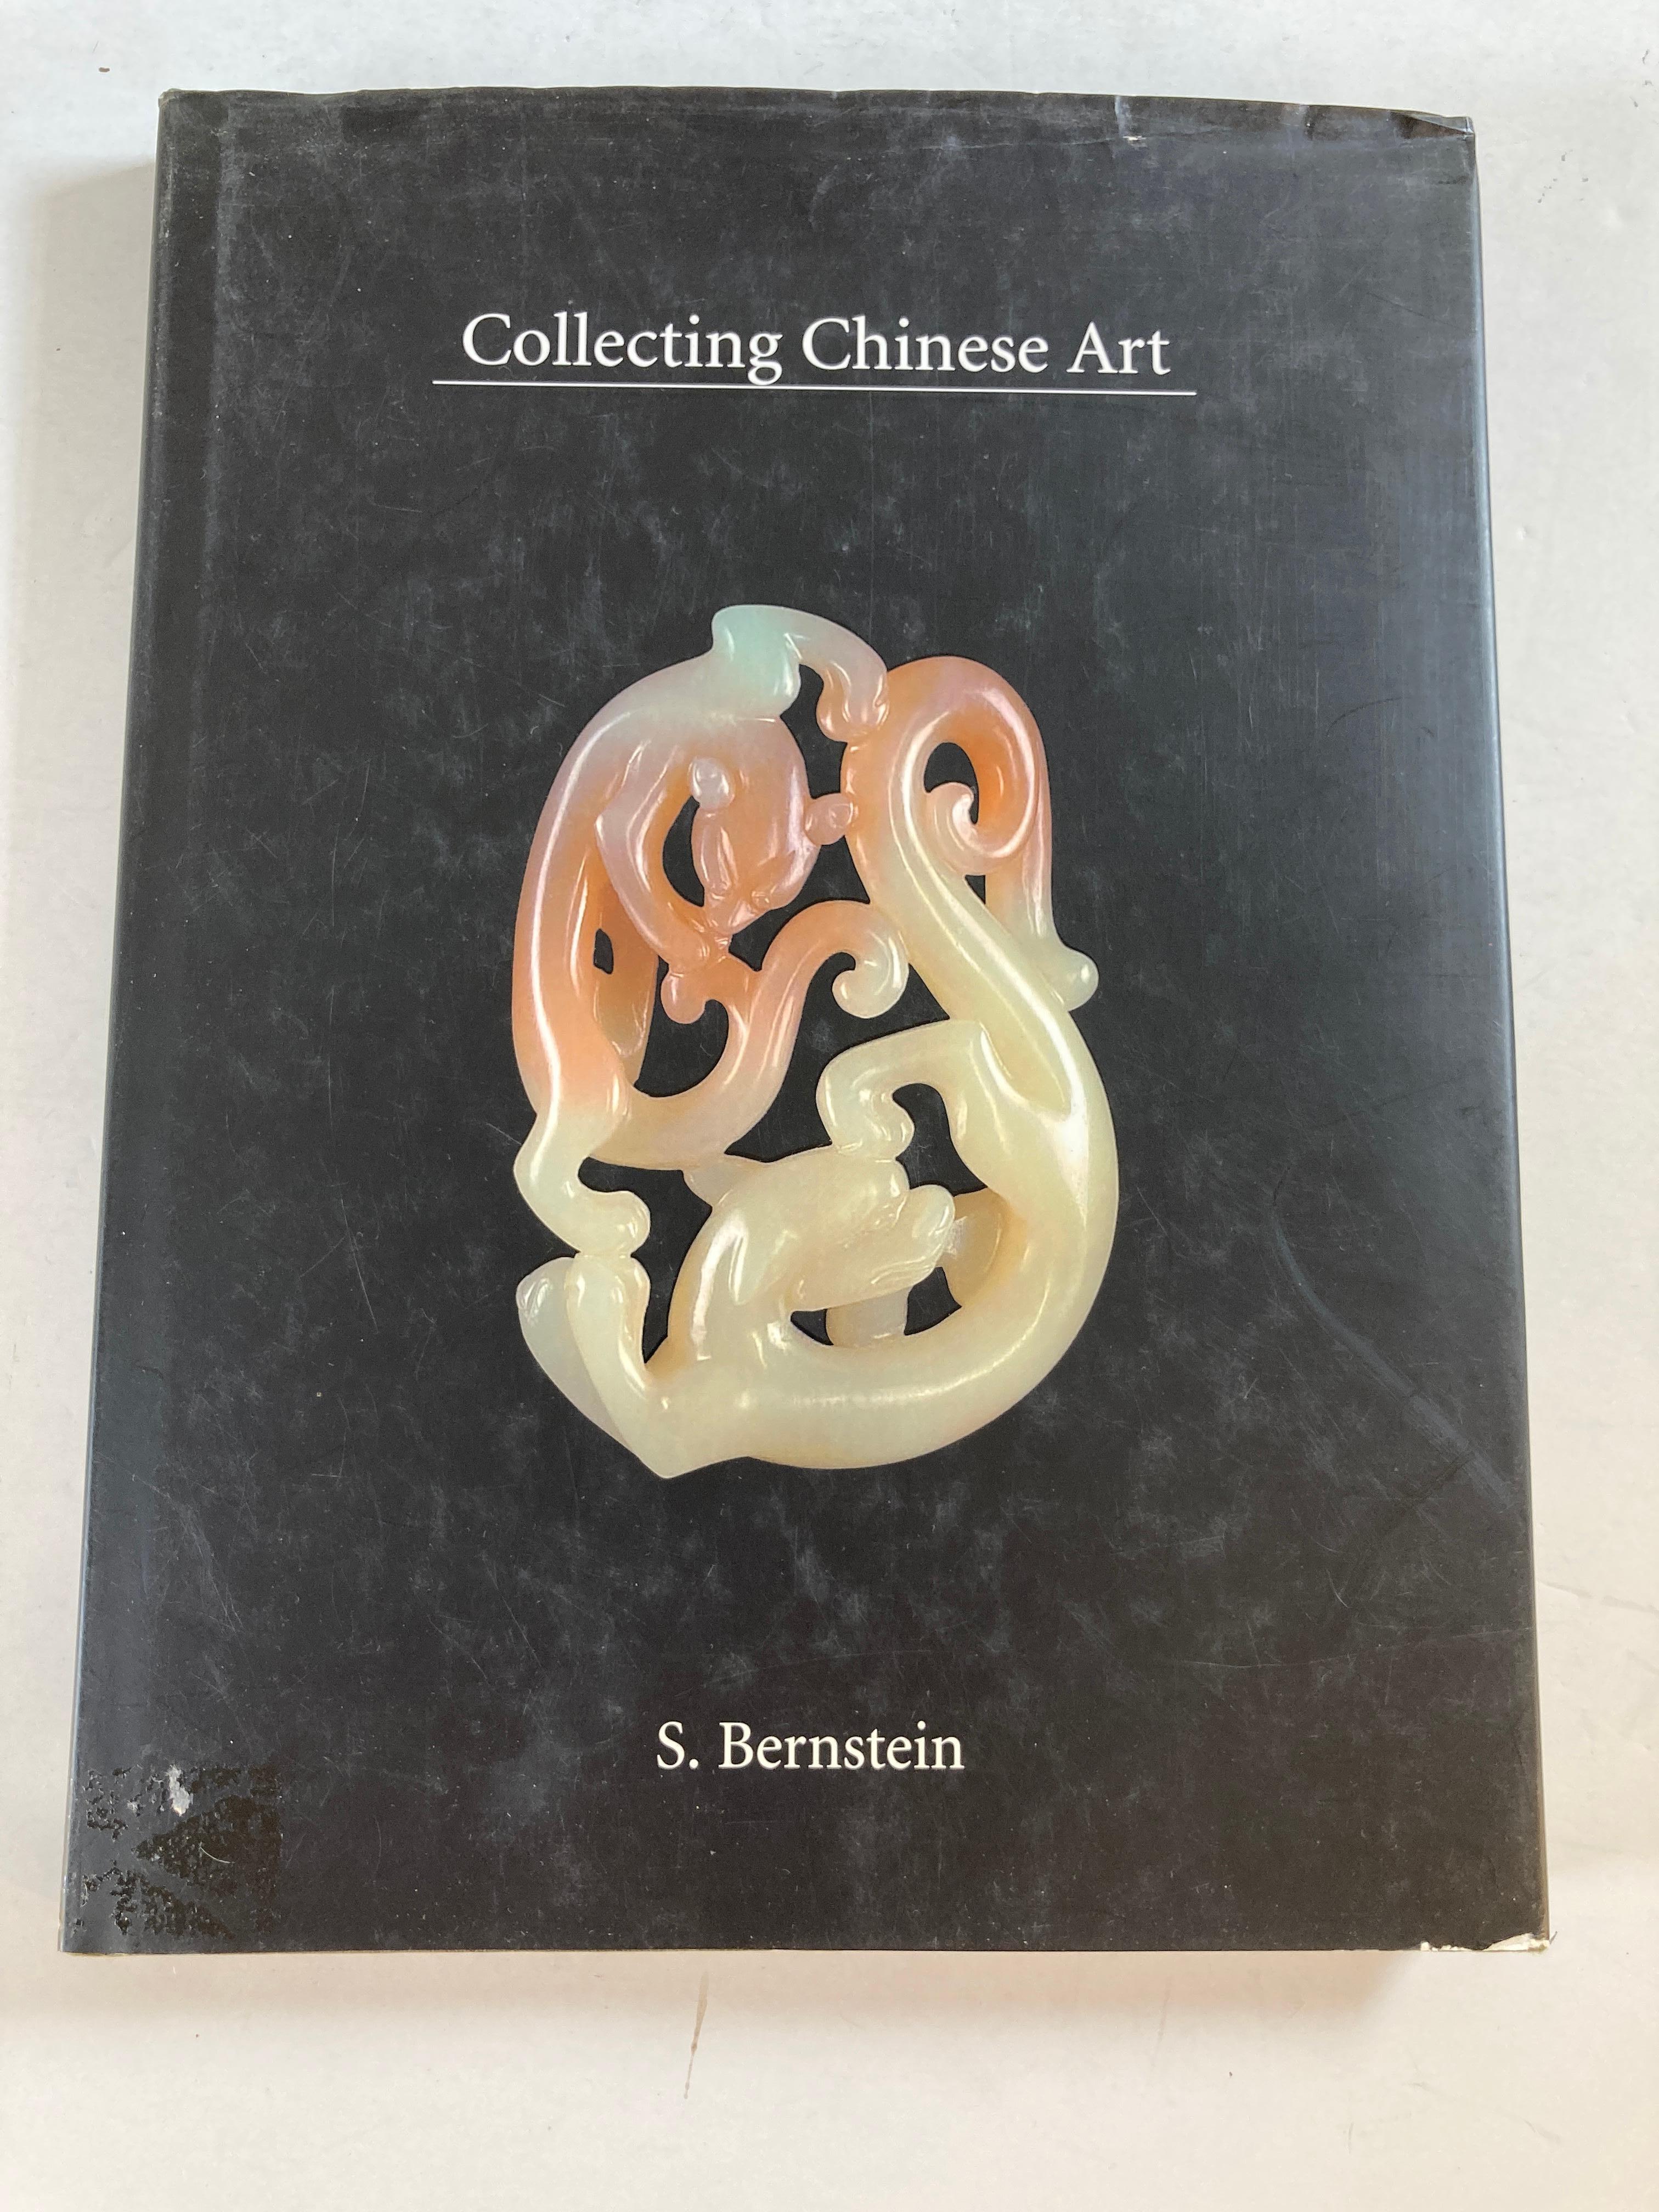 Collecting Chinese Art Book by Sam Bernstein. Much of what we know about early Chinese art is undergoing change in light of recent archaeological discoveries. This entertaining and informative volume by a leading specialist in the field illustrates